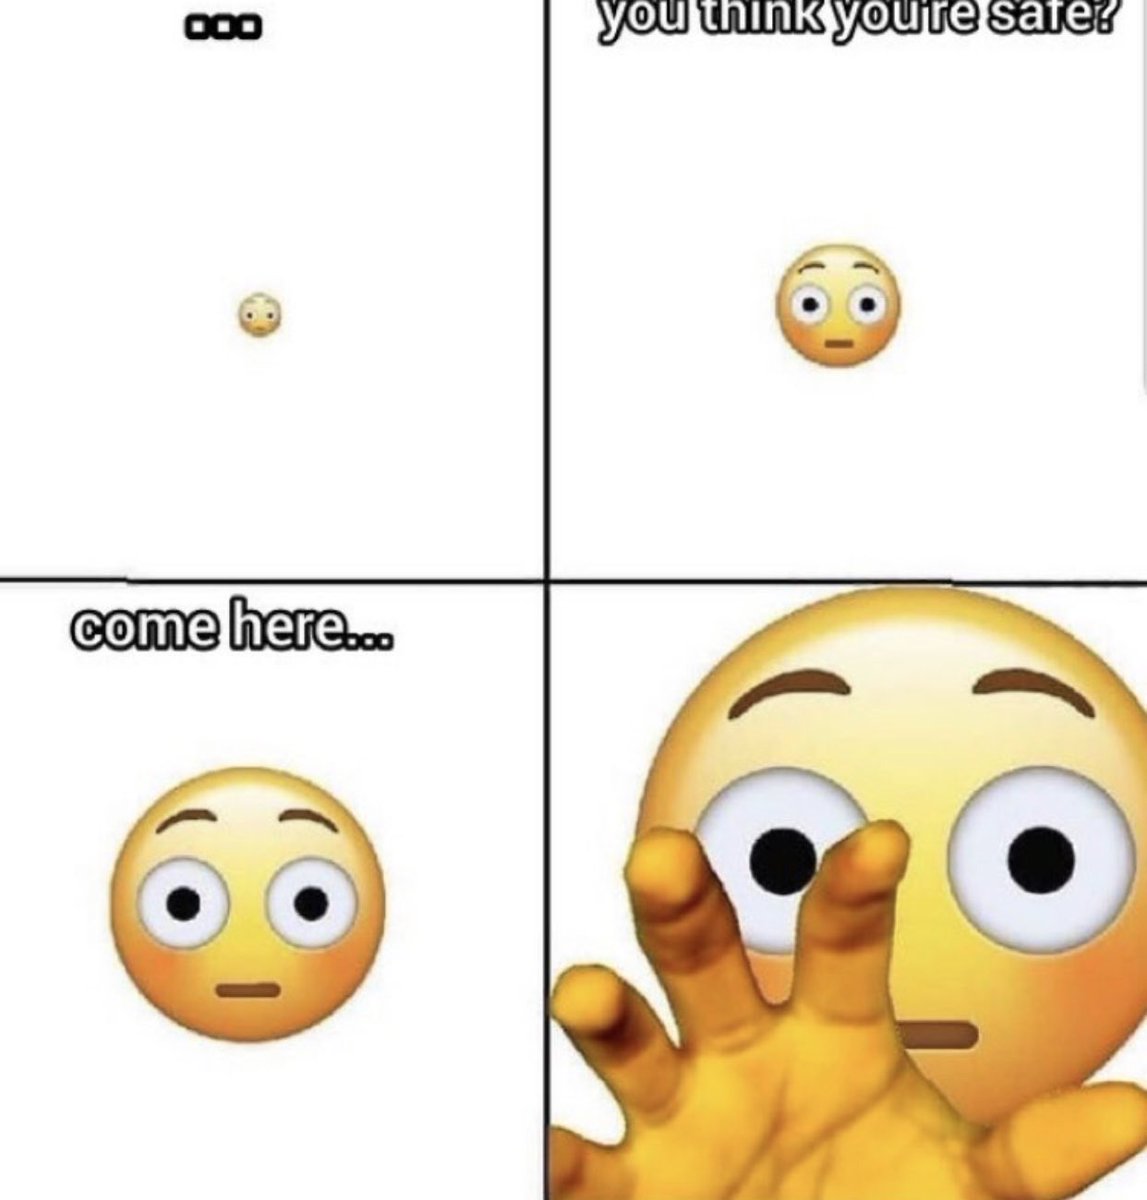 Continue? Yes/No — More cursed emojis, free to use